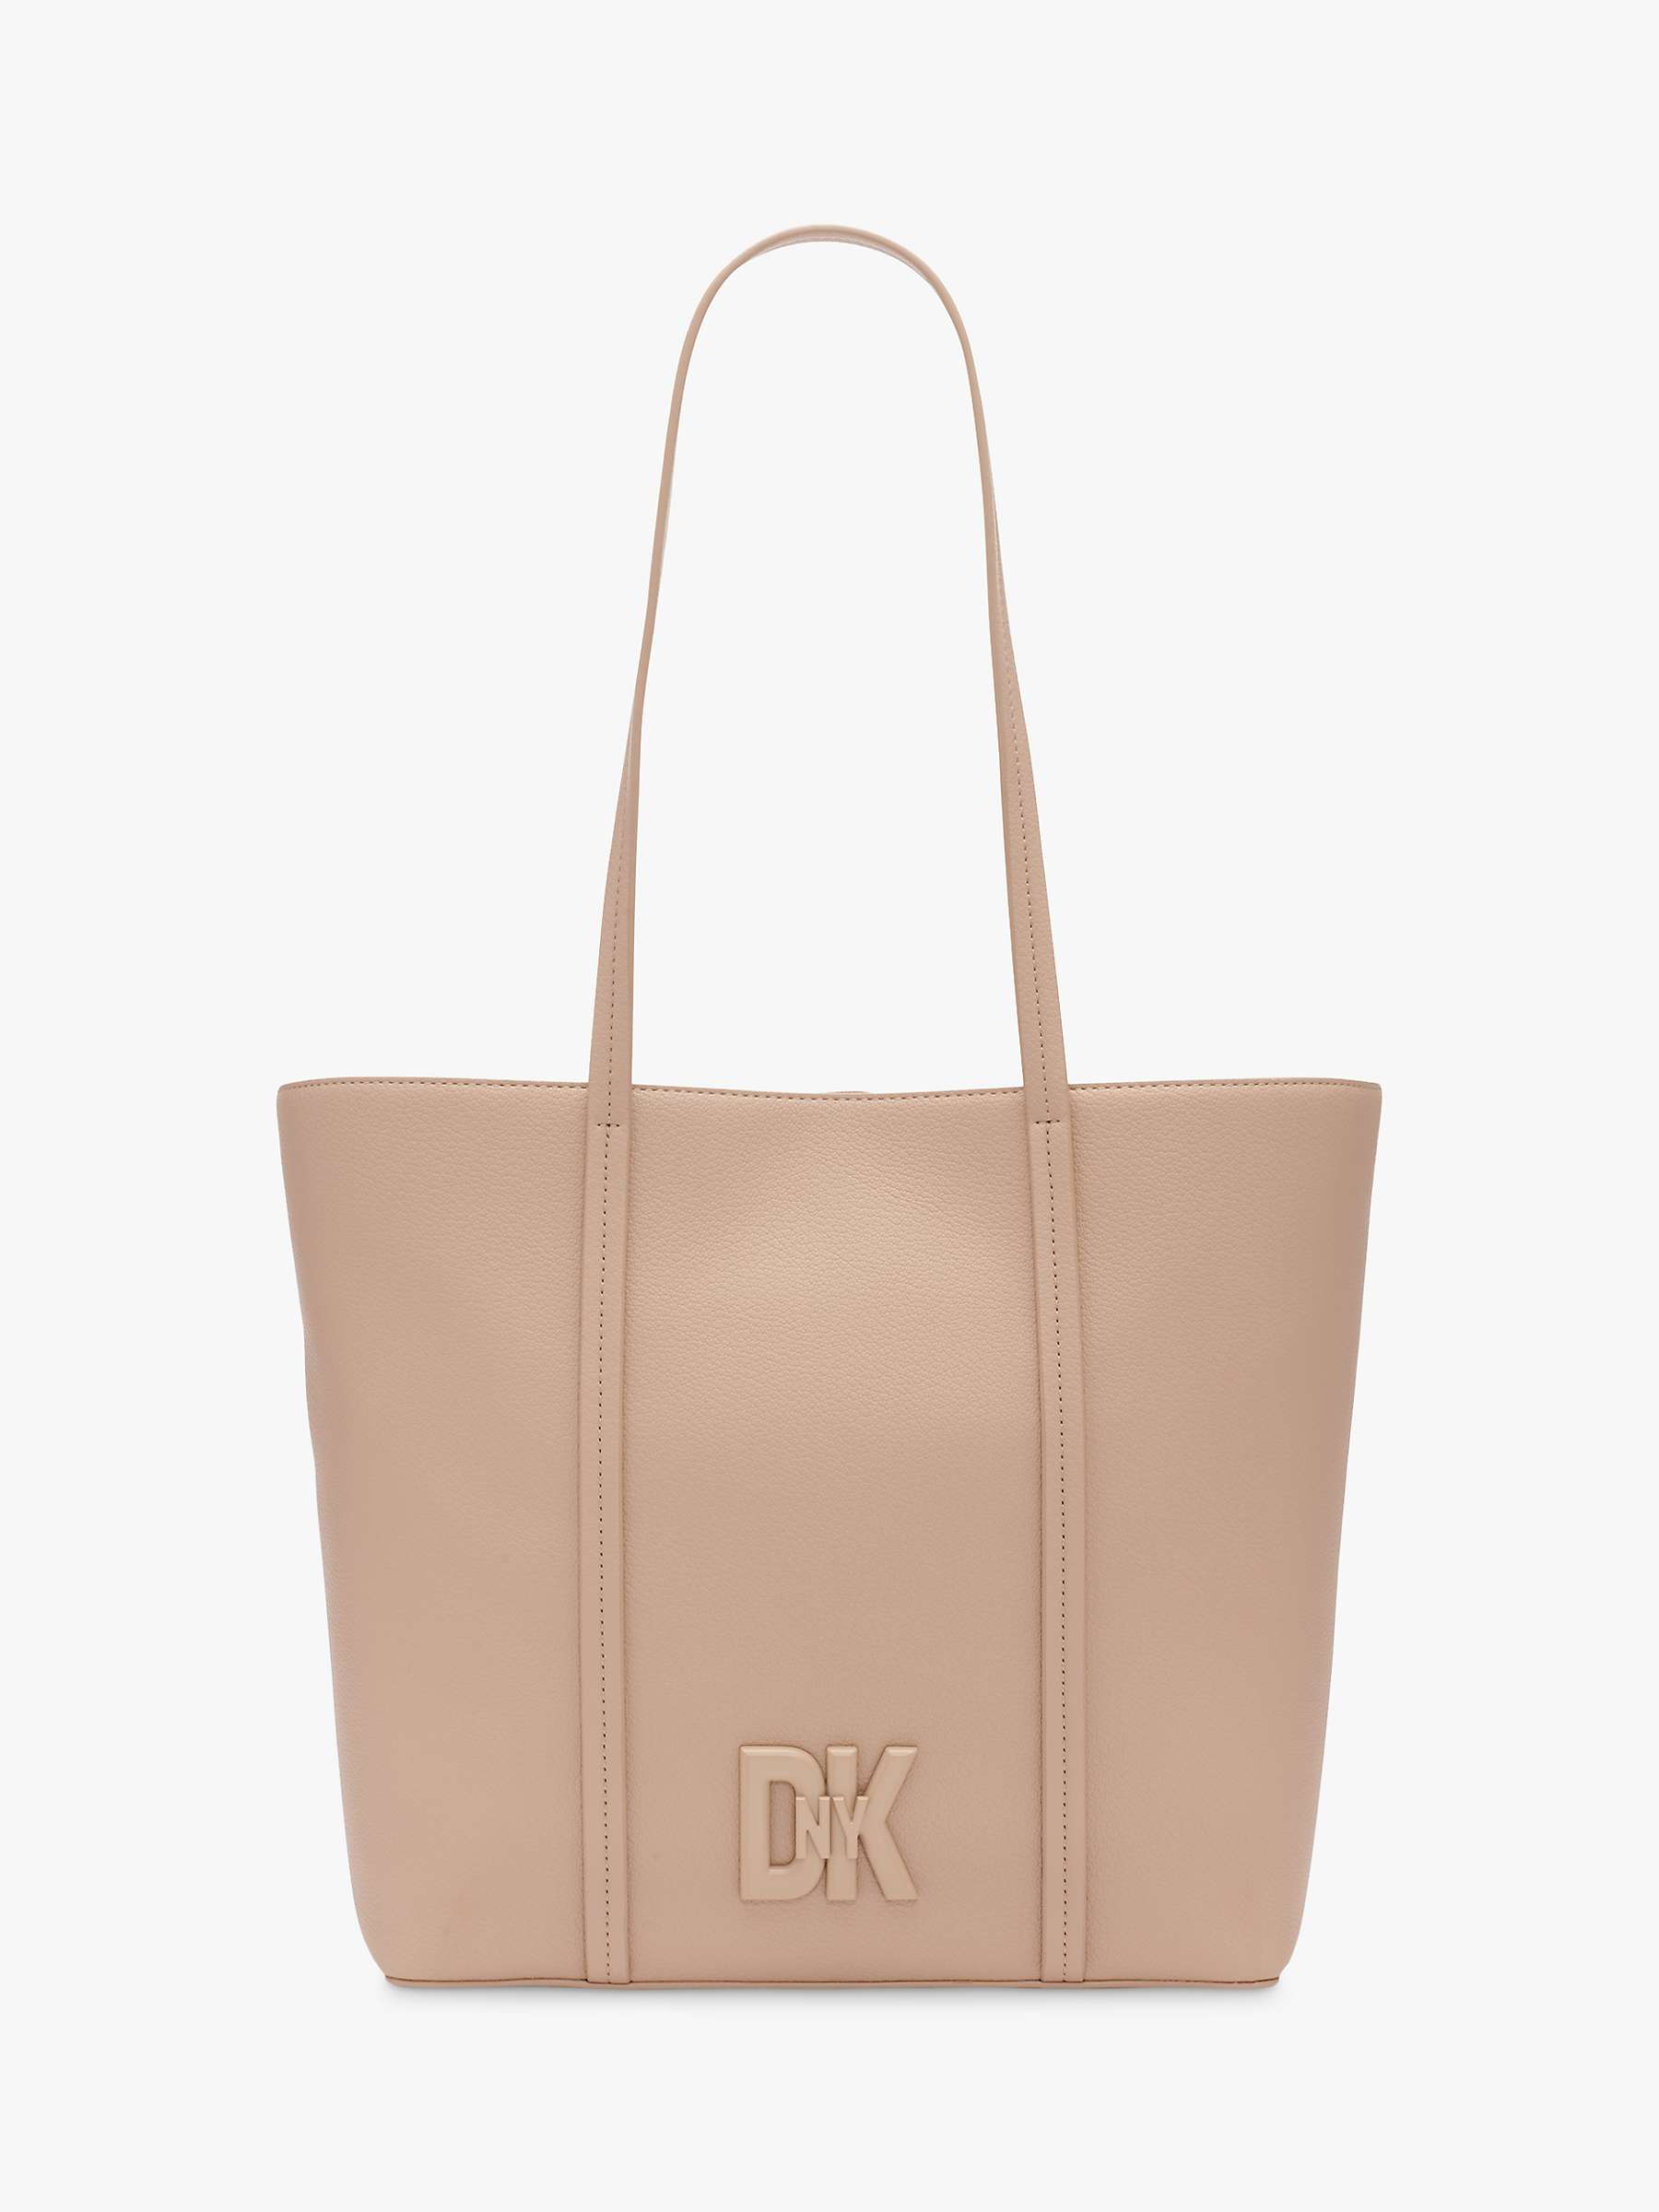 Buy DKNY Seventh Avenue Leather Tote Bag, Neutral Online at johnlewis.com